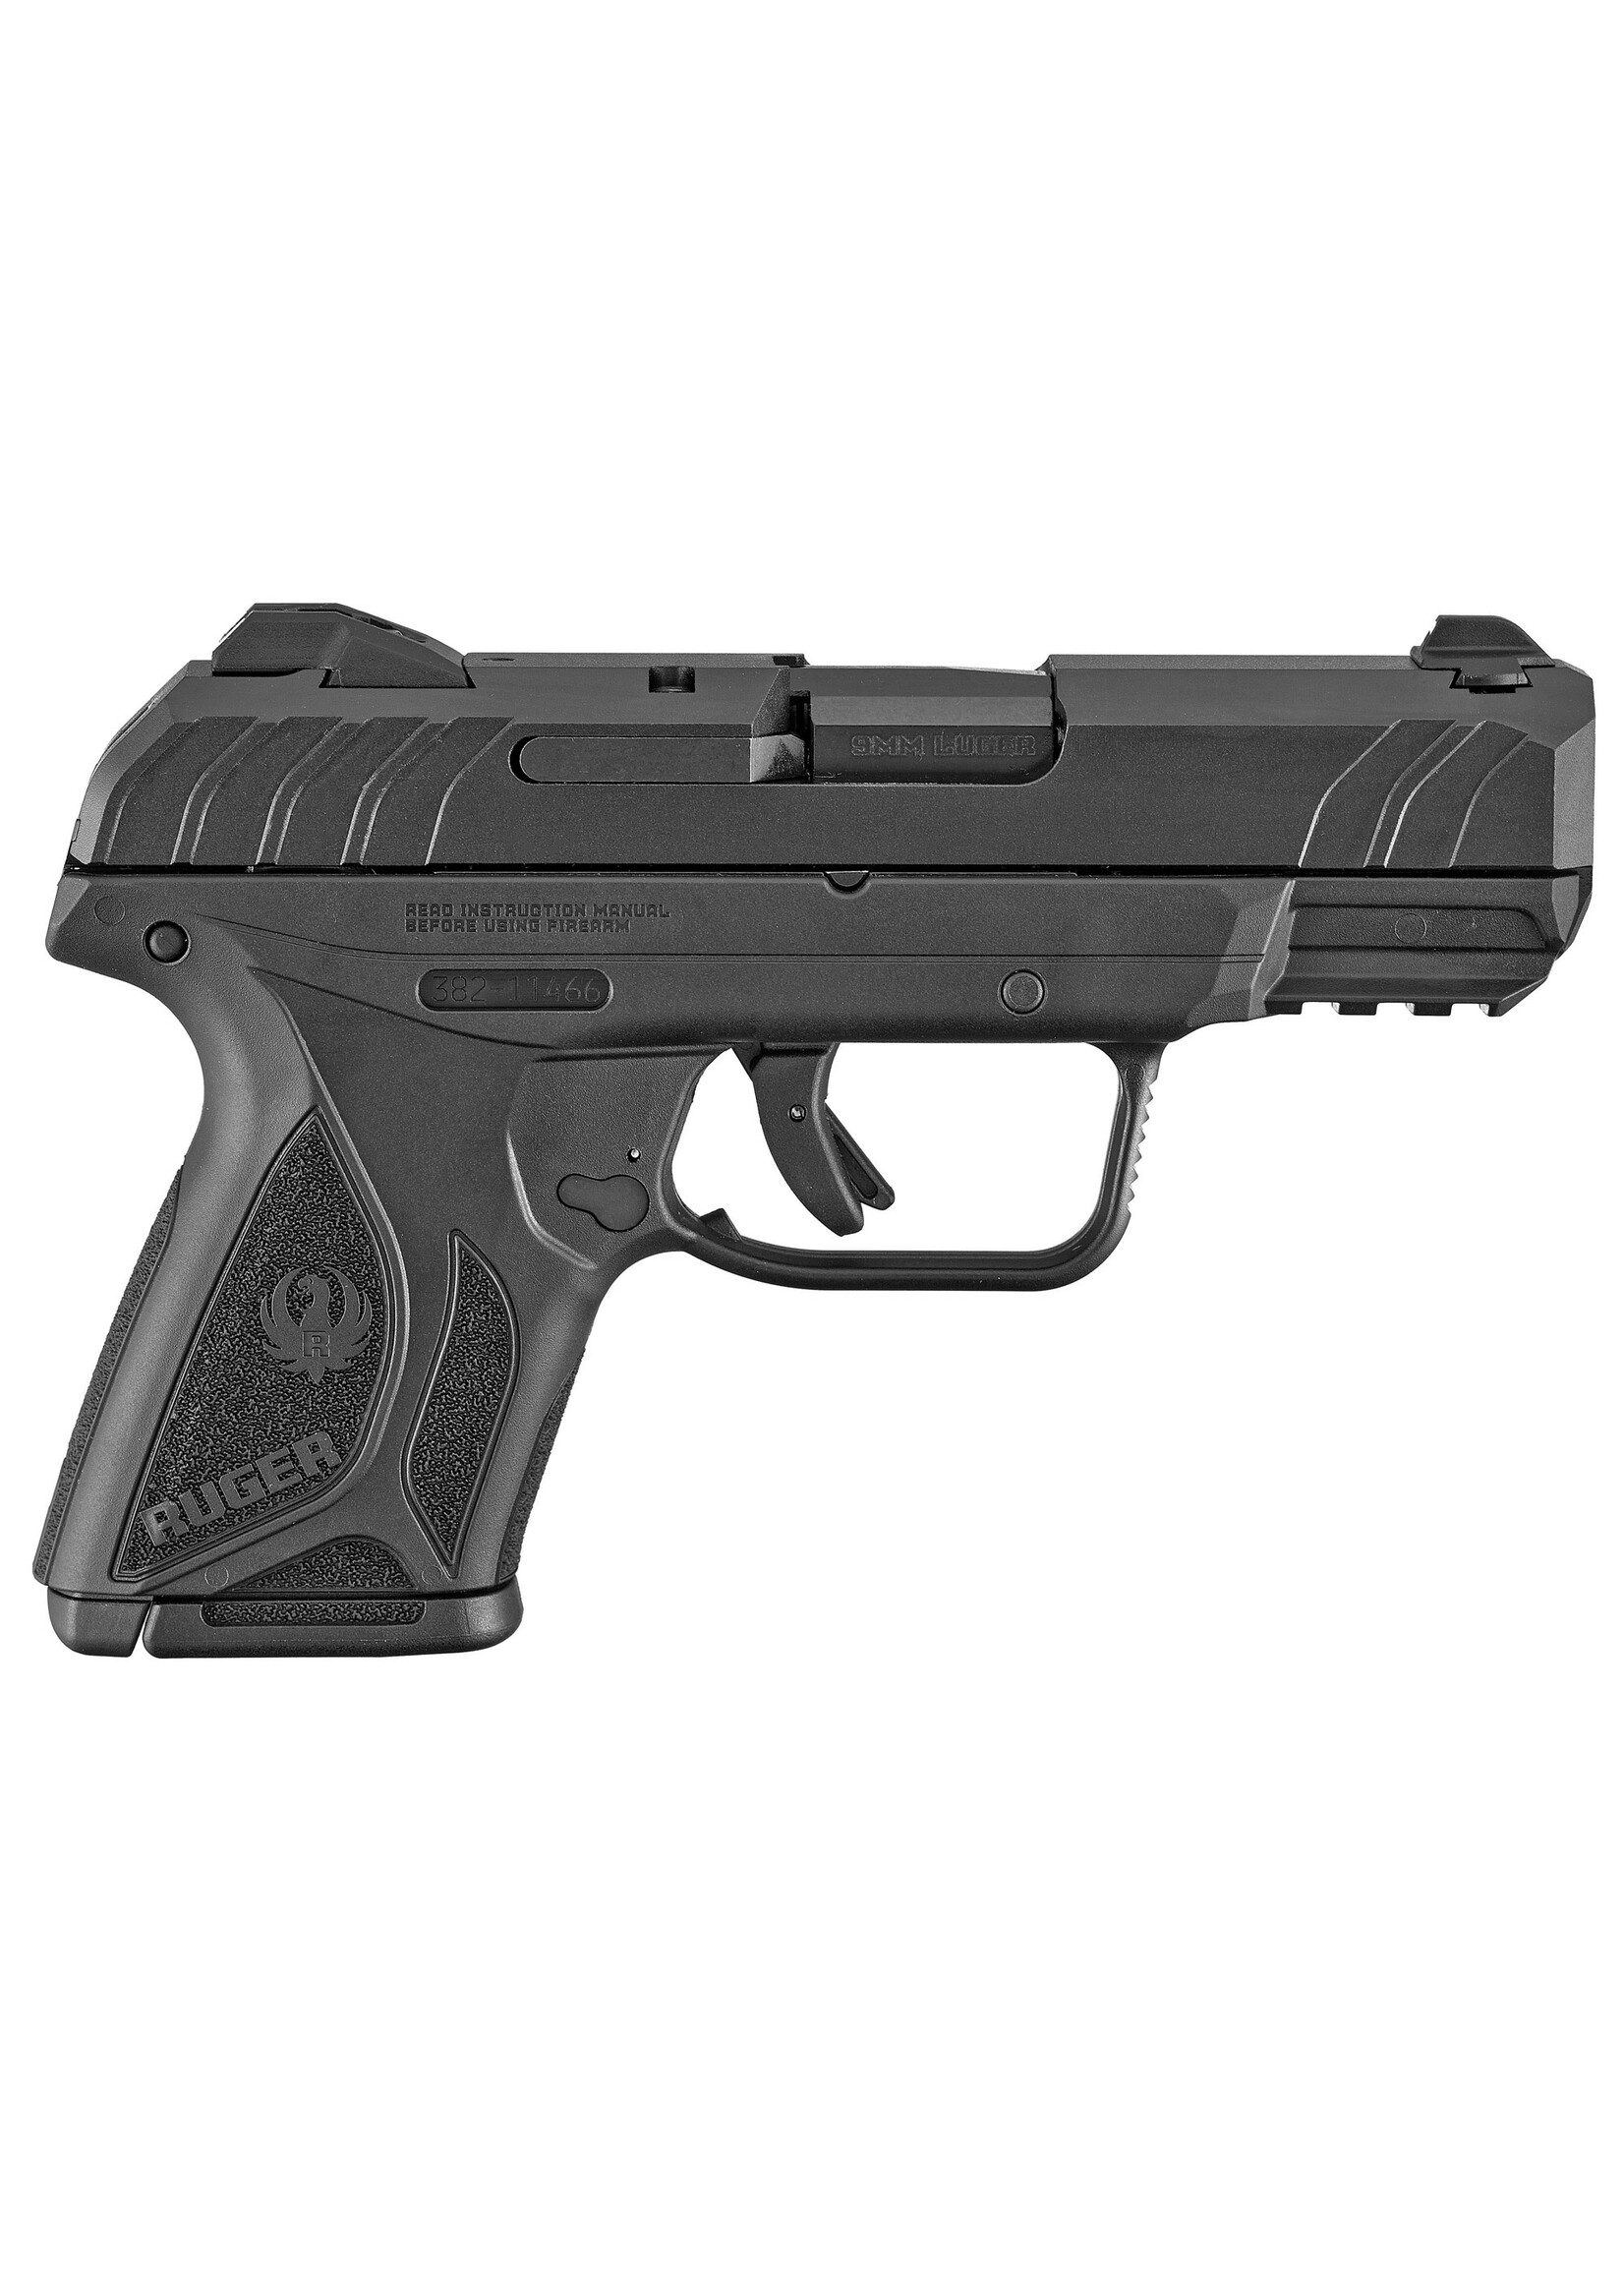 Ruger Ruger Security-9 Compact Pistol BLK 10+1 3818 | includes 2 magazines, 9mm